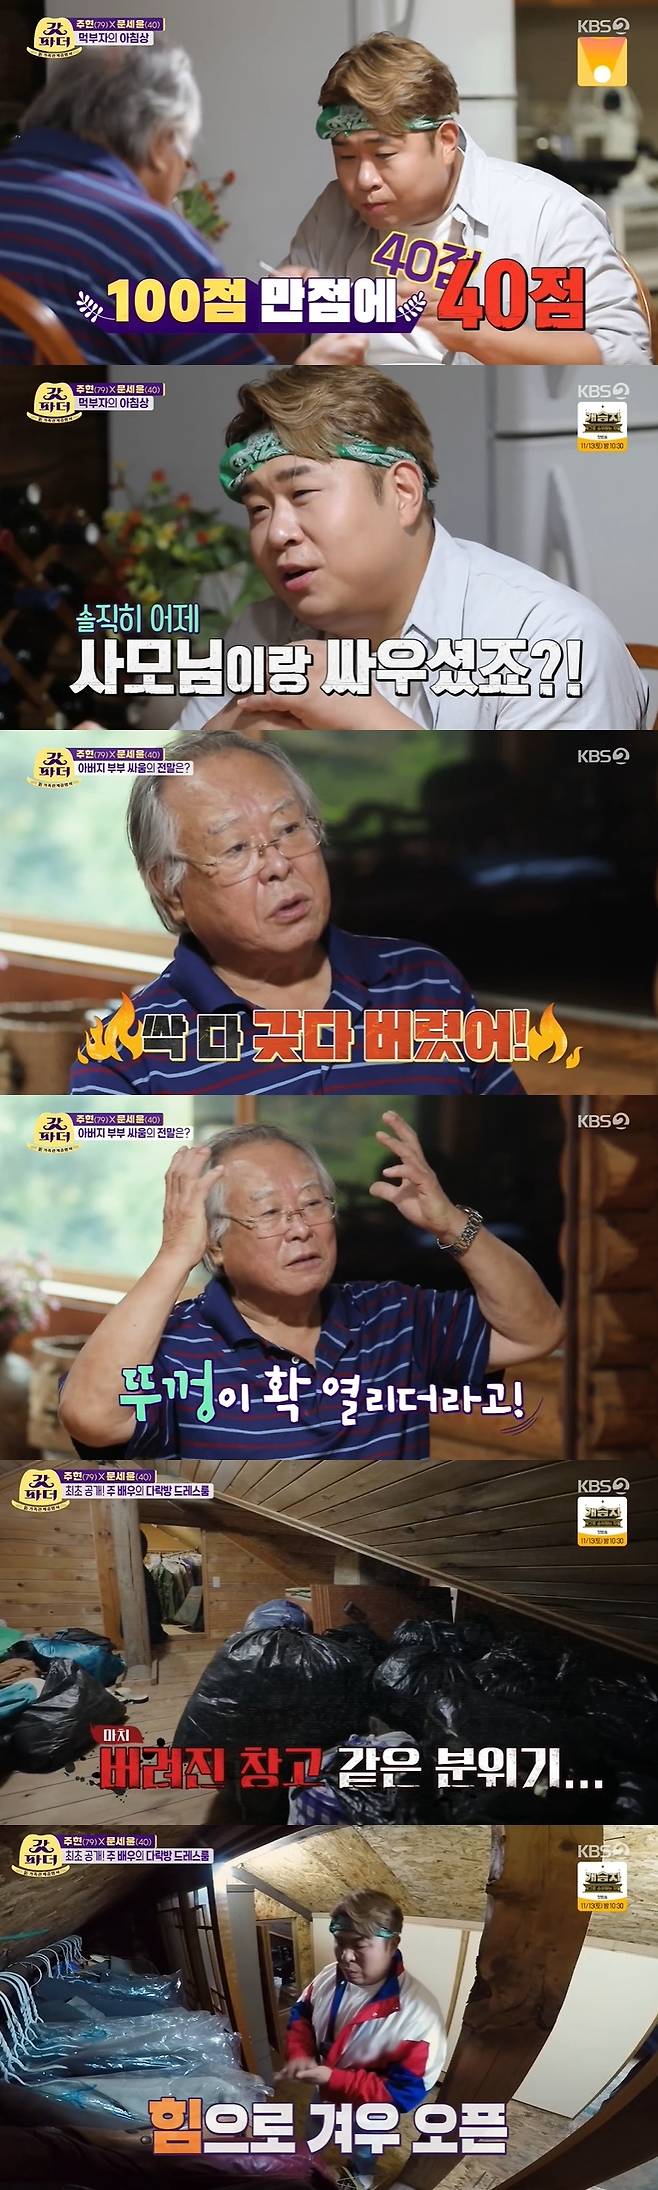 Joo Hyun baffled Mun Se-yun with his extraordinary bean sprouts philosophyOn KBS 2TV The Last Godfather broadcast on November 6, Mun Se-yun made a bean sprout soup for Joo Hyun.Mun Se-yun prepared a bean sprout soup from the refrigerator. Joo Hyun said, I have eaten this almost 50 years, almost Moy Yat.I can say that the bean sprout soup saved my life, and I drink a lot, so I still drink (drink) hard because of the bean sprout soup.I praise the bean sprout soup, he said.Joo Hyun poured out nagging from Cheongyang red pepper to timing of bean sprouts.When Mun Se-yun, tired of nagging, asked, Do not you make a sound next to your wife when you eat? Joo Hyun hurriedly turned.Mun Se-yun had breakfast with bean sprout soup and his favorite pink sausage roast, even in the nagging. Joo Hyun, who ate bean sprout soup, said, 40 out of 100.Its not a national national dish compared to what my wife boiled. Mun Se-yun was embarrassed that he could not beat her skills.Mun Se-yun tried to make up for the red pepper powder, but Joo Hyun said, The bean sprouts must be big.After eating sausage, he gave me 50 points, saying, Its better than I thought.Mun Se-yun asked Joo Hyun, who responded with a sensitive response on the day, I honestly felt today and fought with my wife yesterday.Joo Hyun said, Im surprised to hear you. My wife is a clean-cut man. If its not organized, she wont see it.I am habitual to prepare my own clothes, so if I fit the size, I buy it by color.  I brought clothes from the attic and I tried to wear it one day.They said they had taken it all away for recycling. I was going to get it, so I said, Youve already cleaned it up. The lid was open.Mun Se-yun, dressed in a couples sportswear prepared by Joo Hyun, climbed into the attic of Joo Hyun in a secret space.There were plastic bags all over the place, clothes all over the place, and in the atmosphere of an abandoned warehouse, Mun Se-yun was embarrassed that he was not like it.